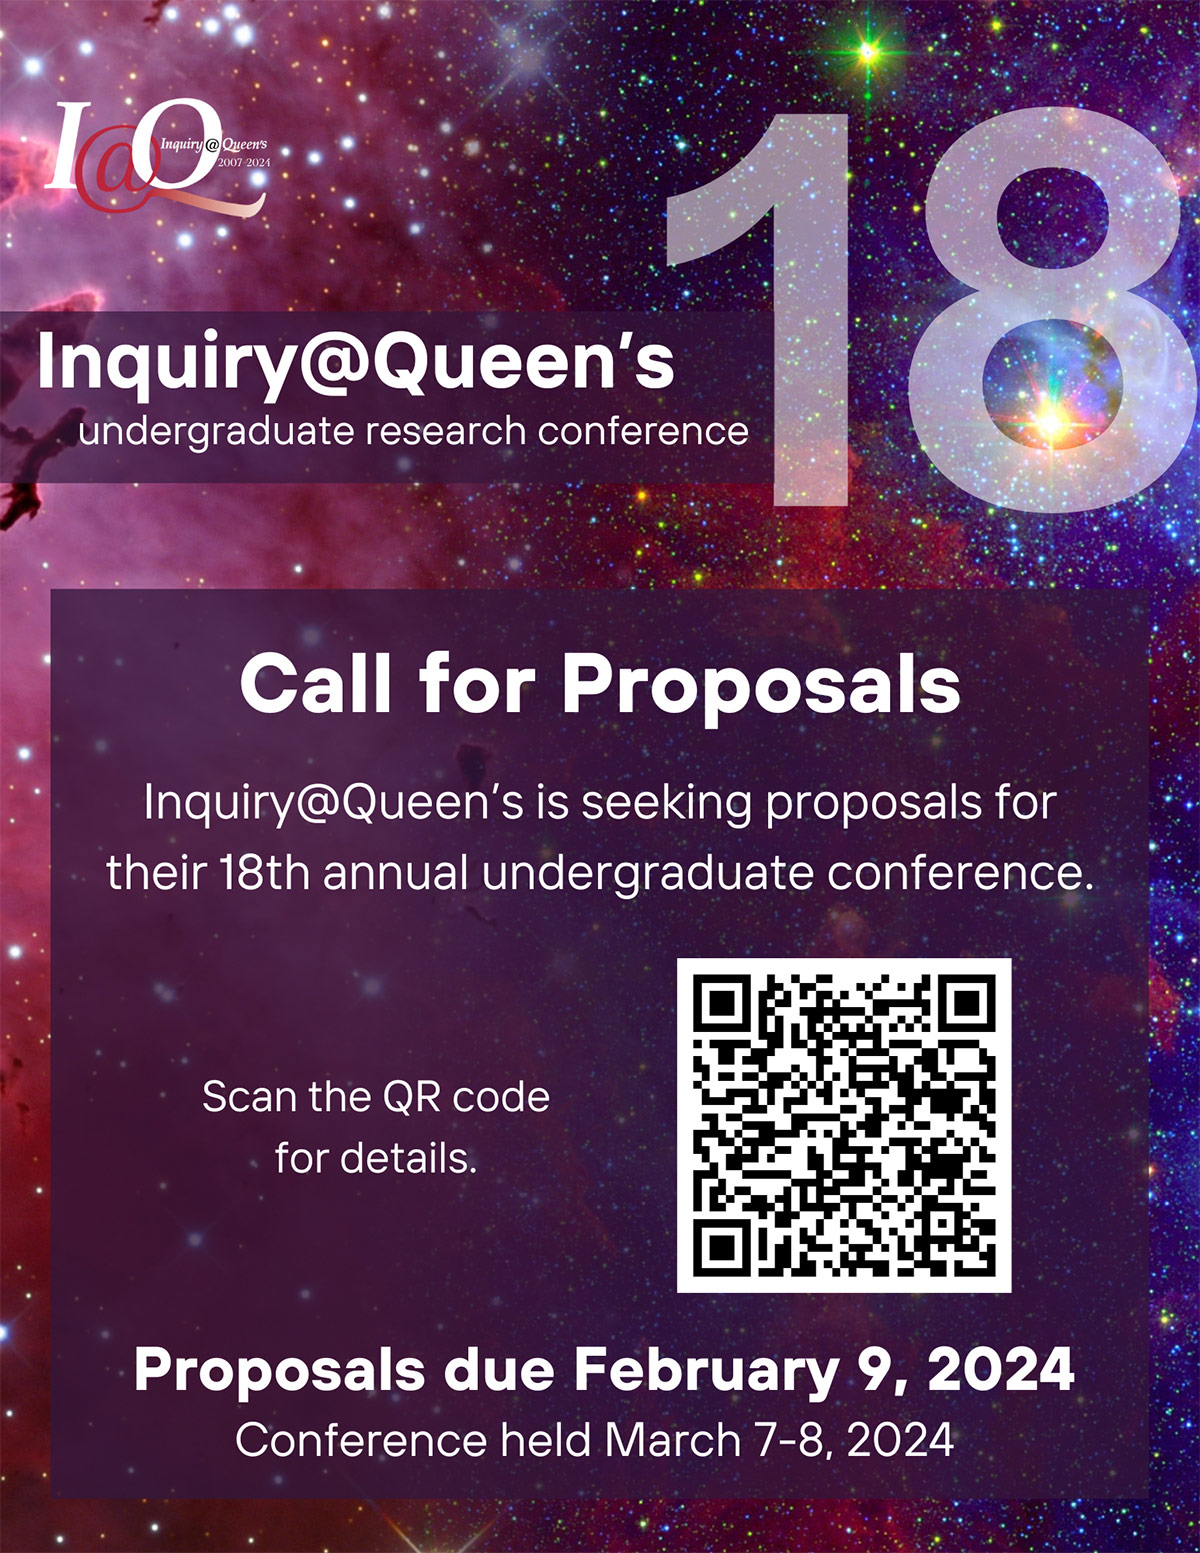 Poster of Inquiry@Queen's 18th annual Undergraduate Research conference